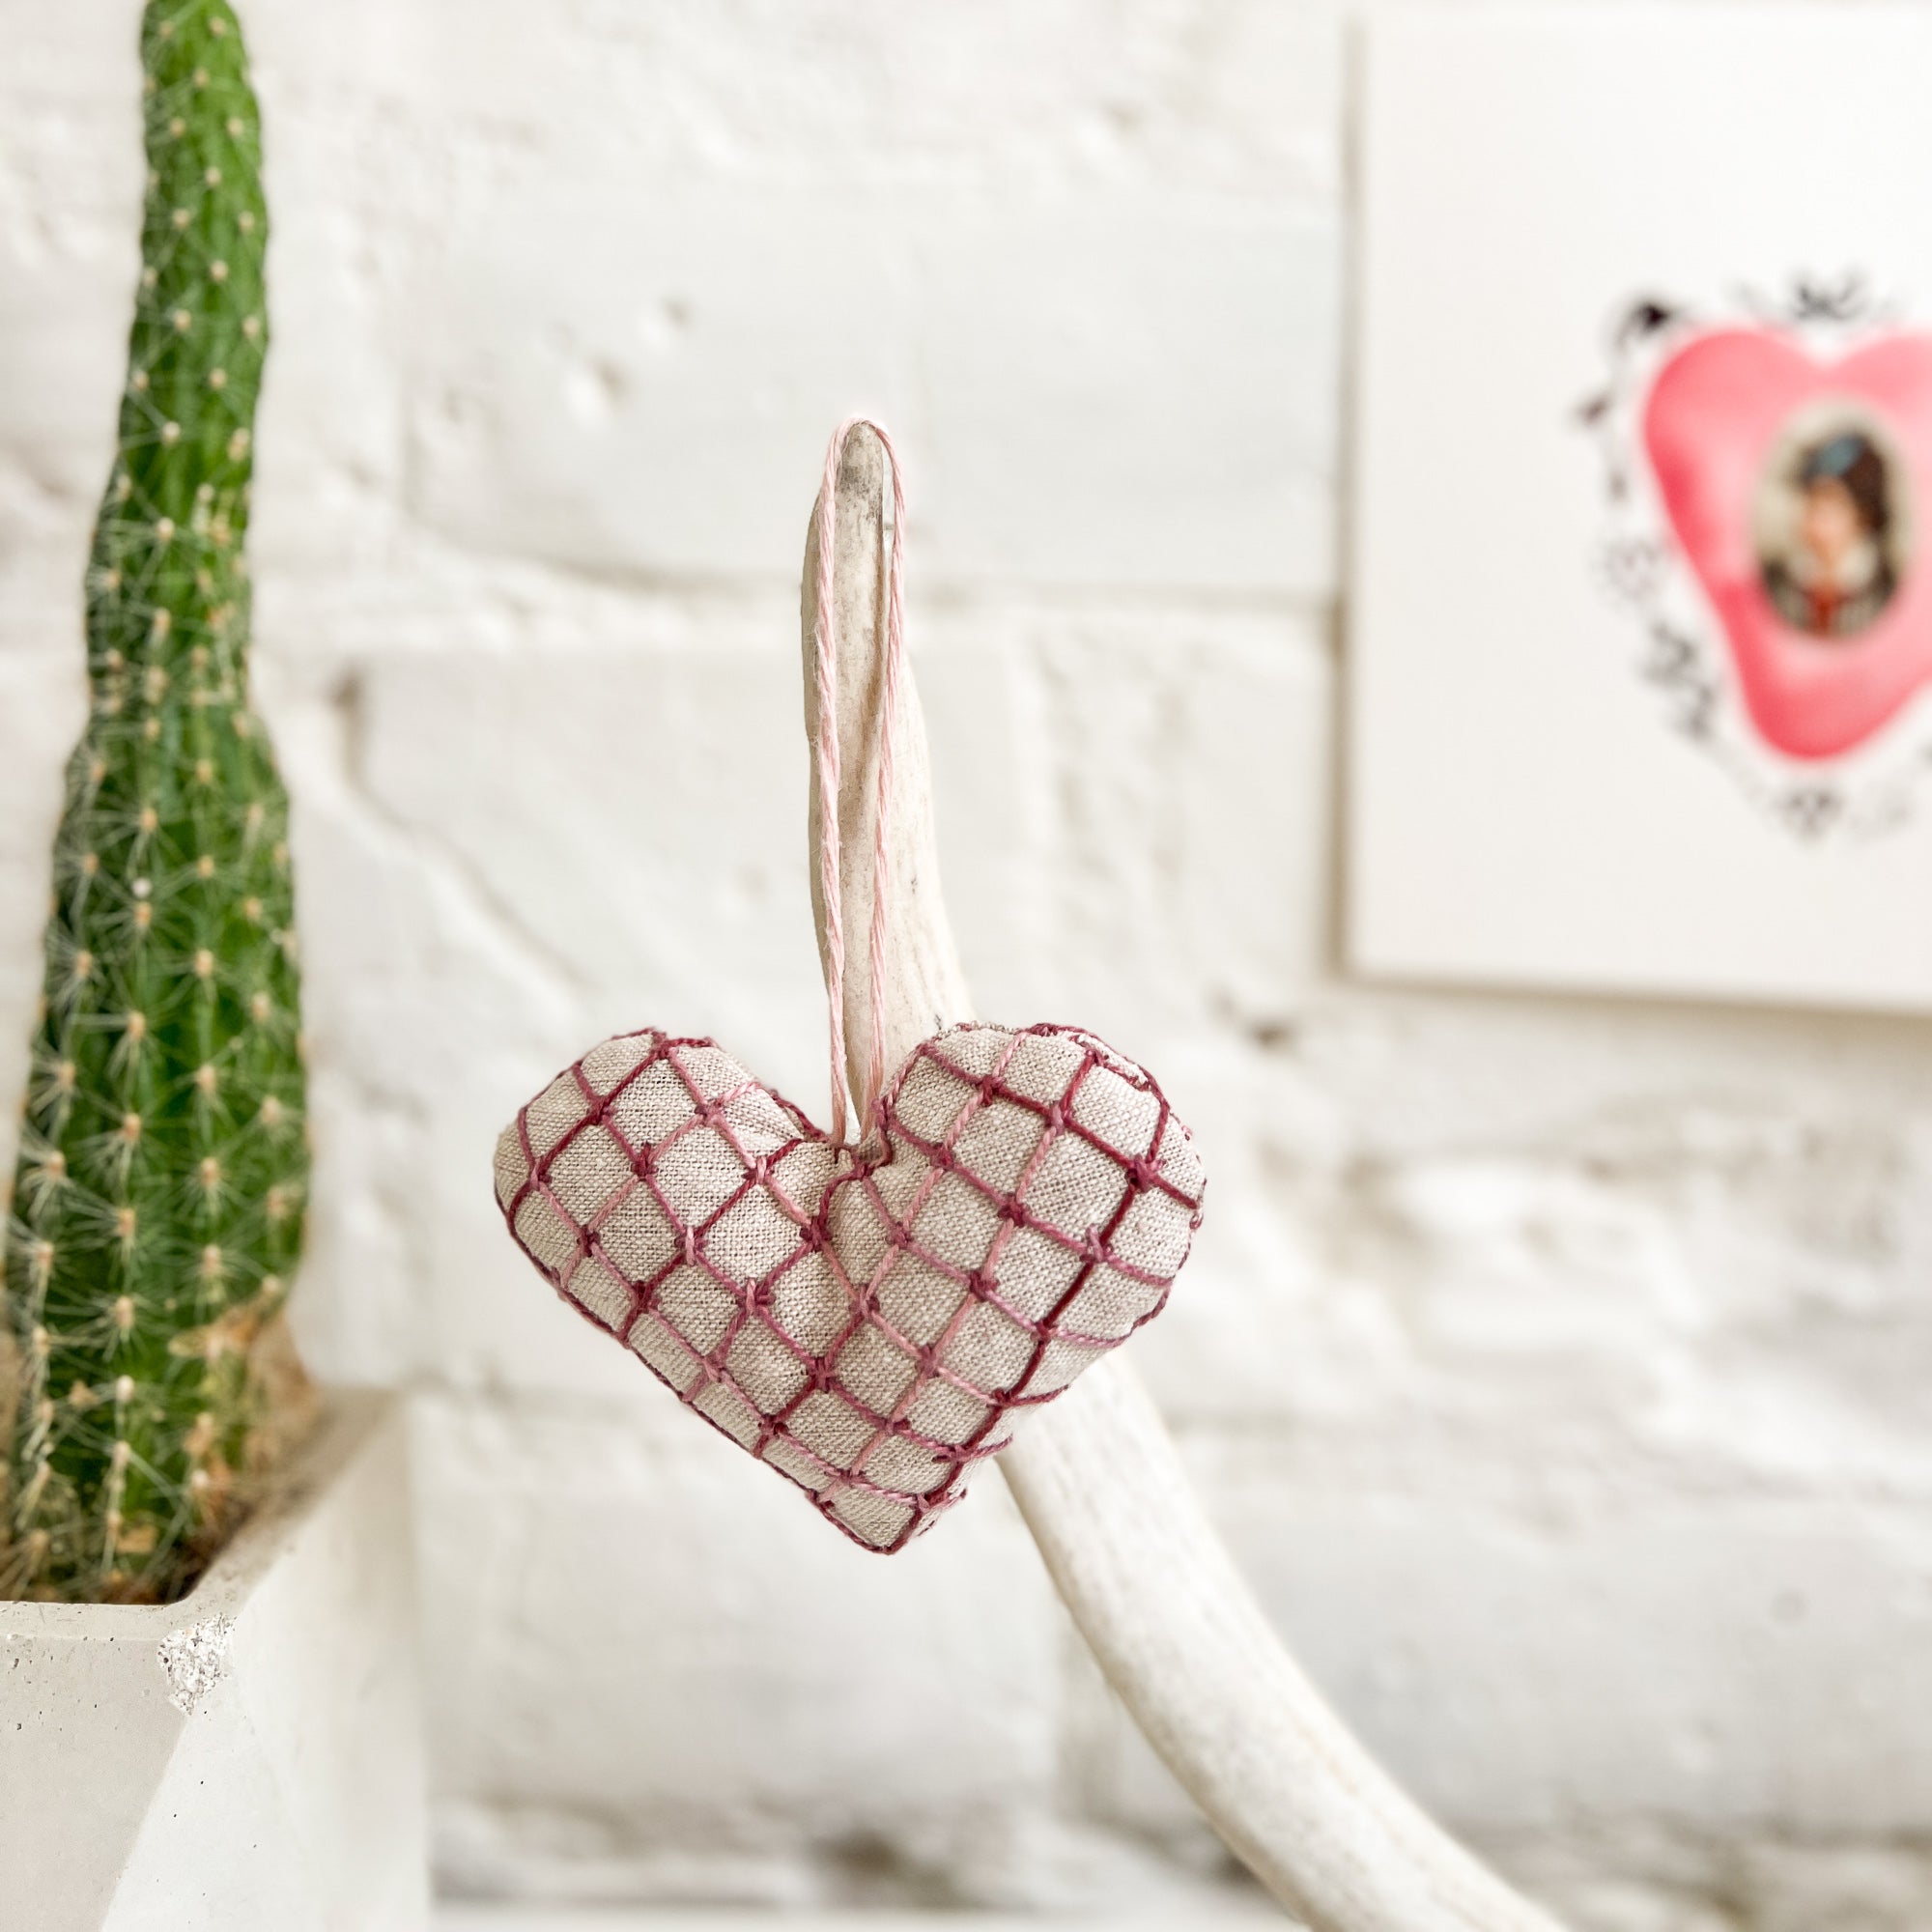 Jane Embroidered Hearts Pattern & Video Class